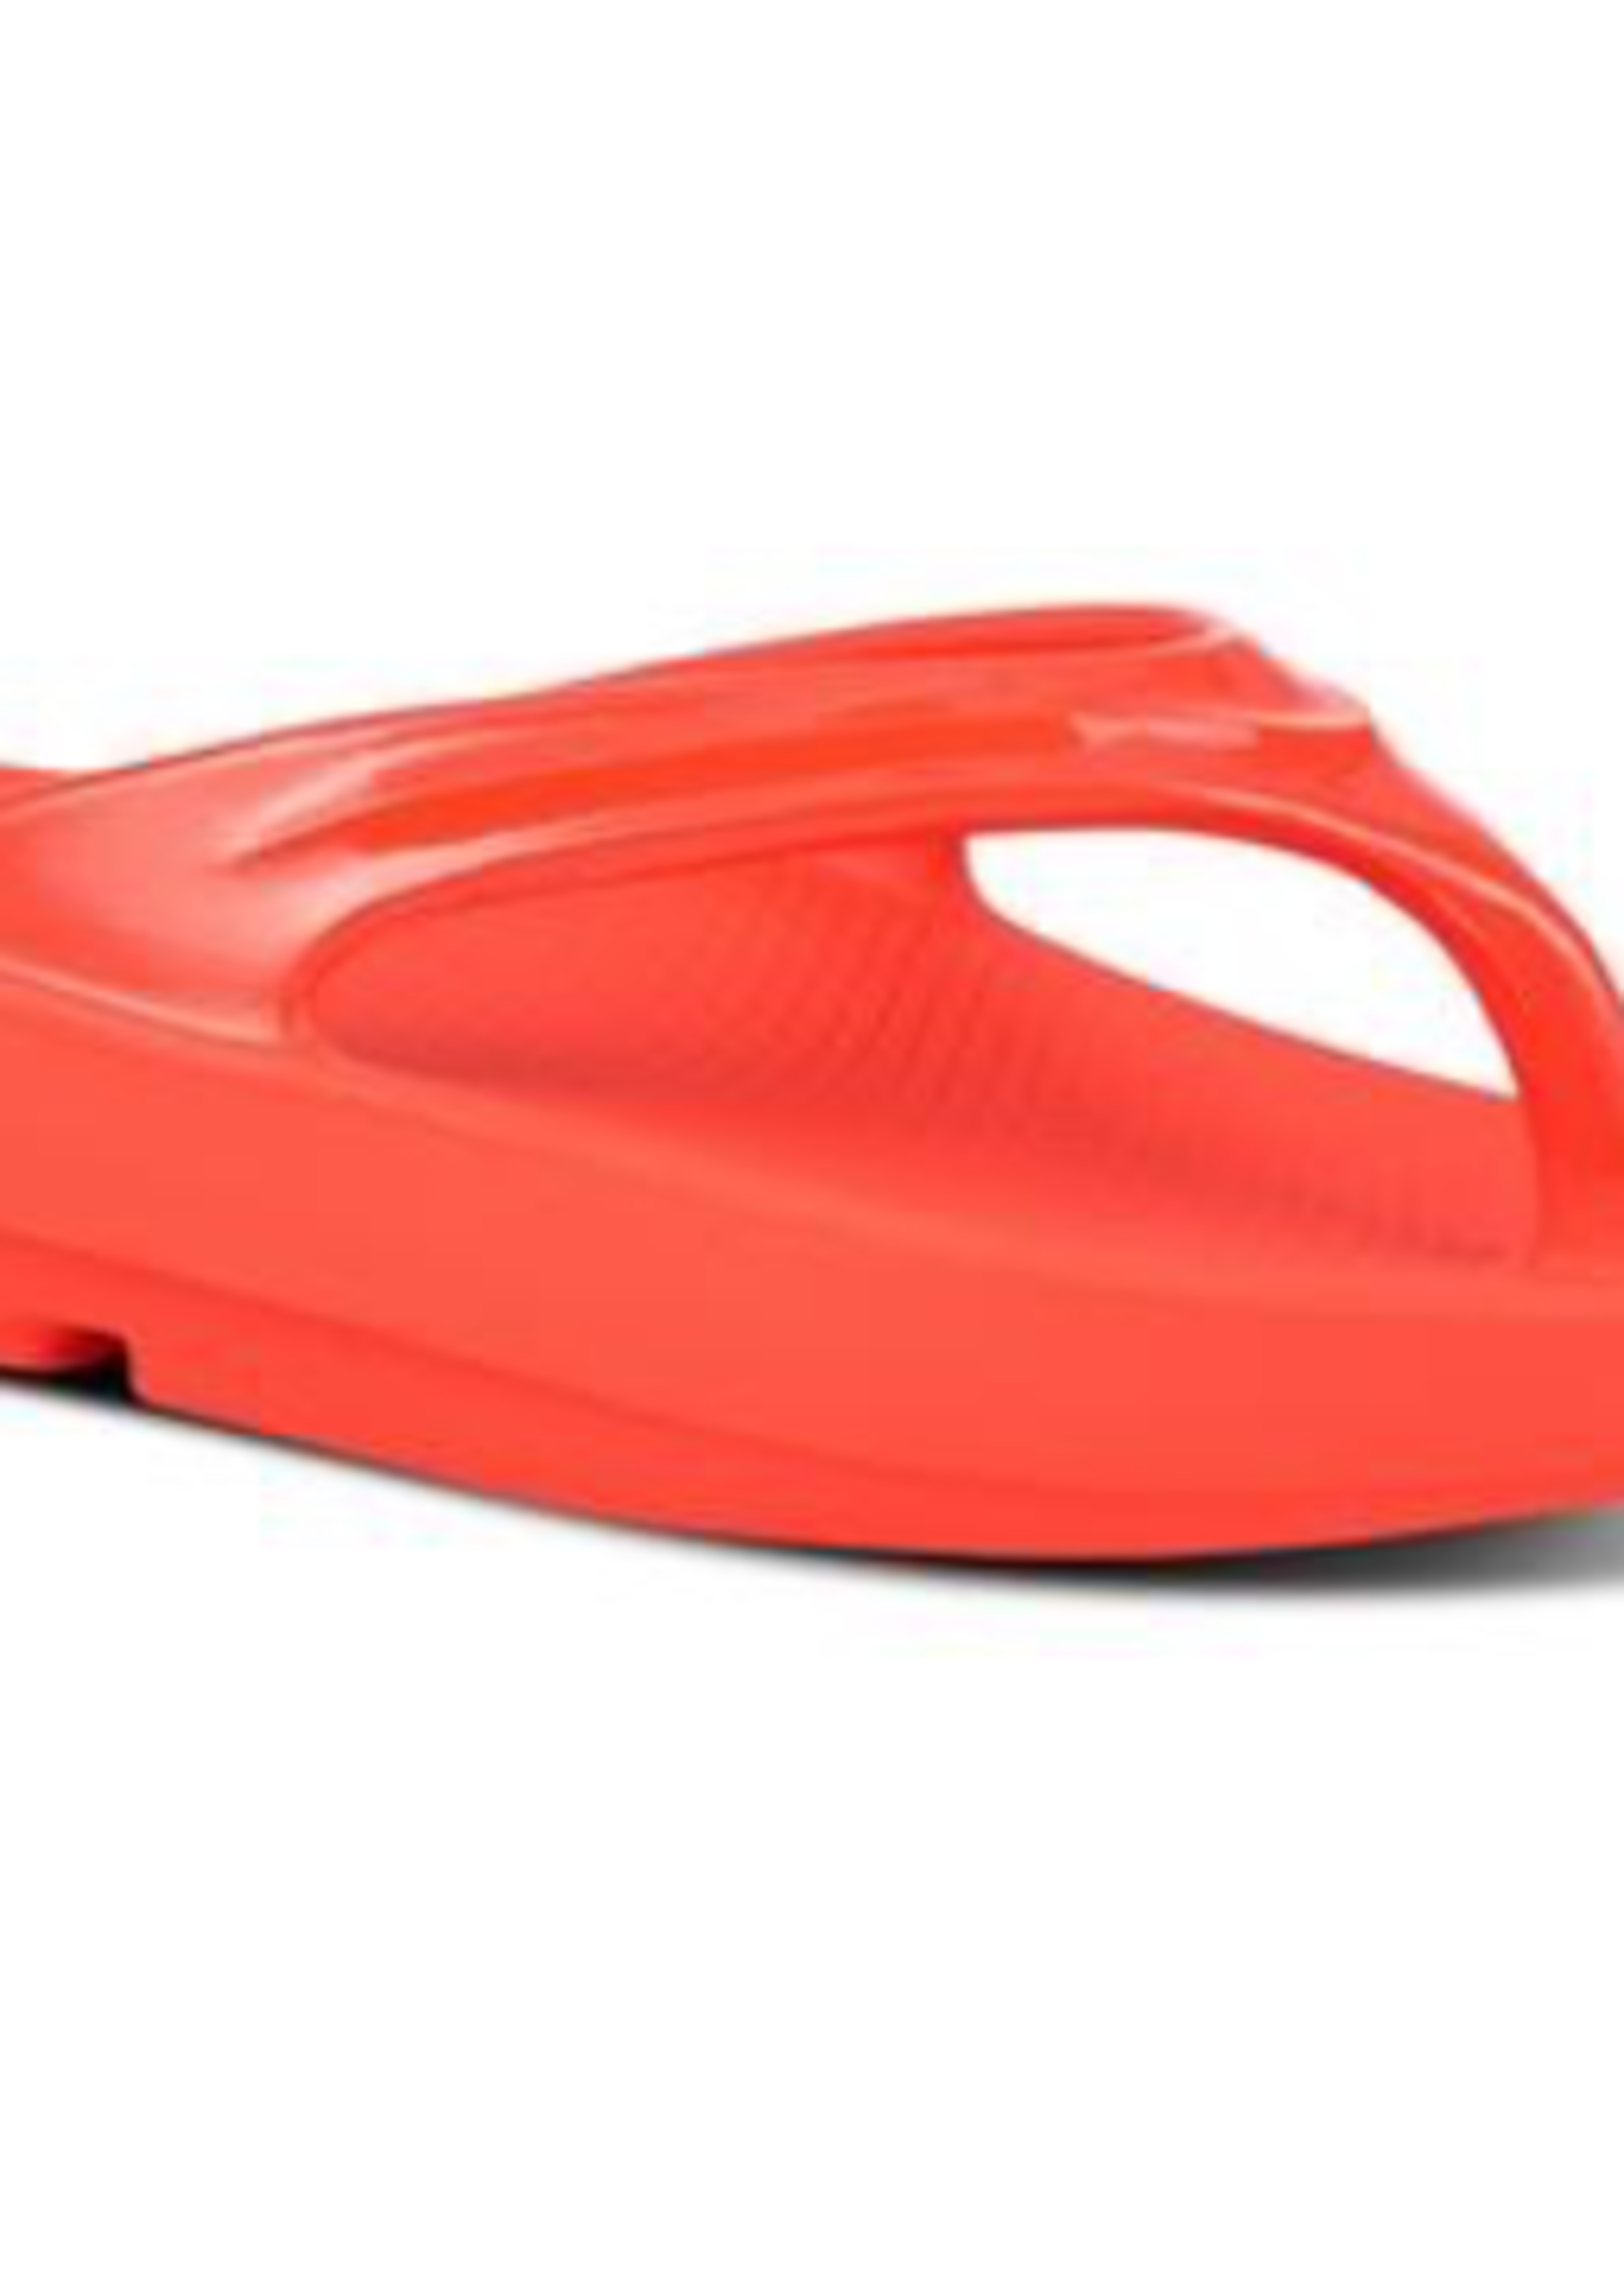 OOFOS OOFOAM OOLALA SOLID GLOSS RECOVERY FLIP FLOP